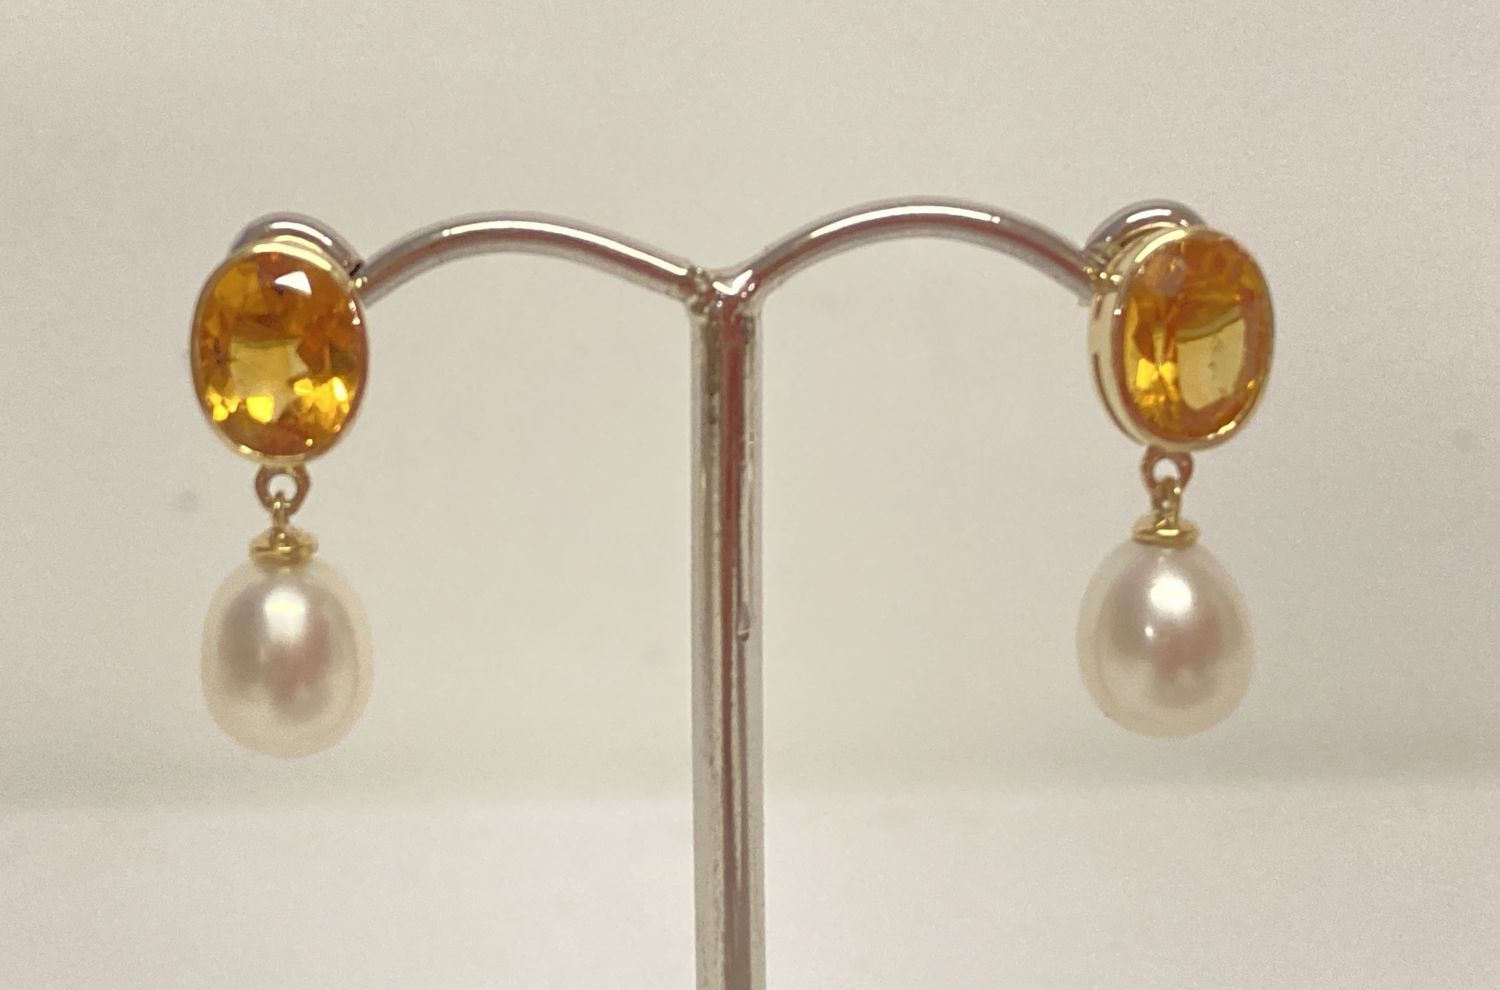 A Pair of 9ct gold, citrine and pearl drop style earrings.